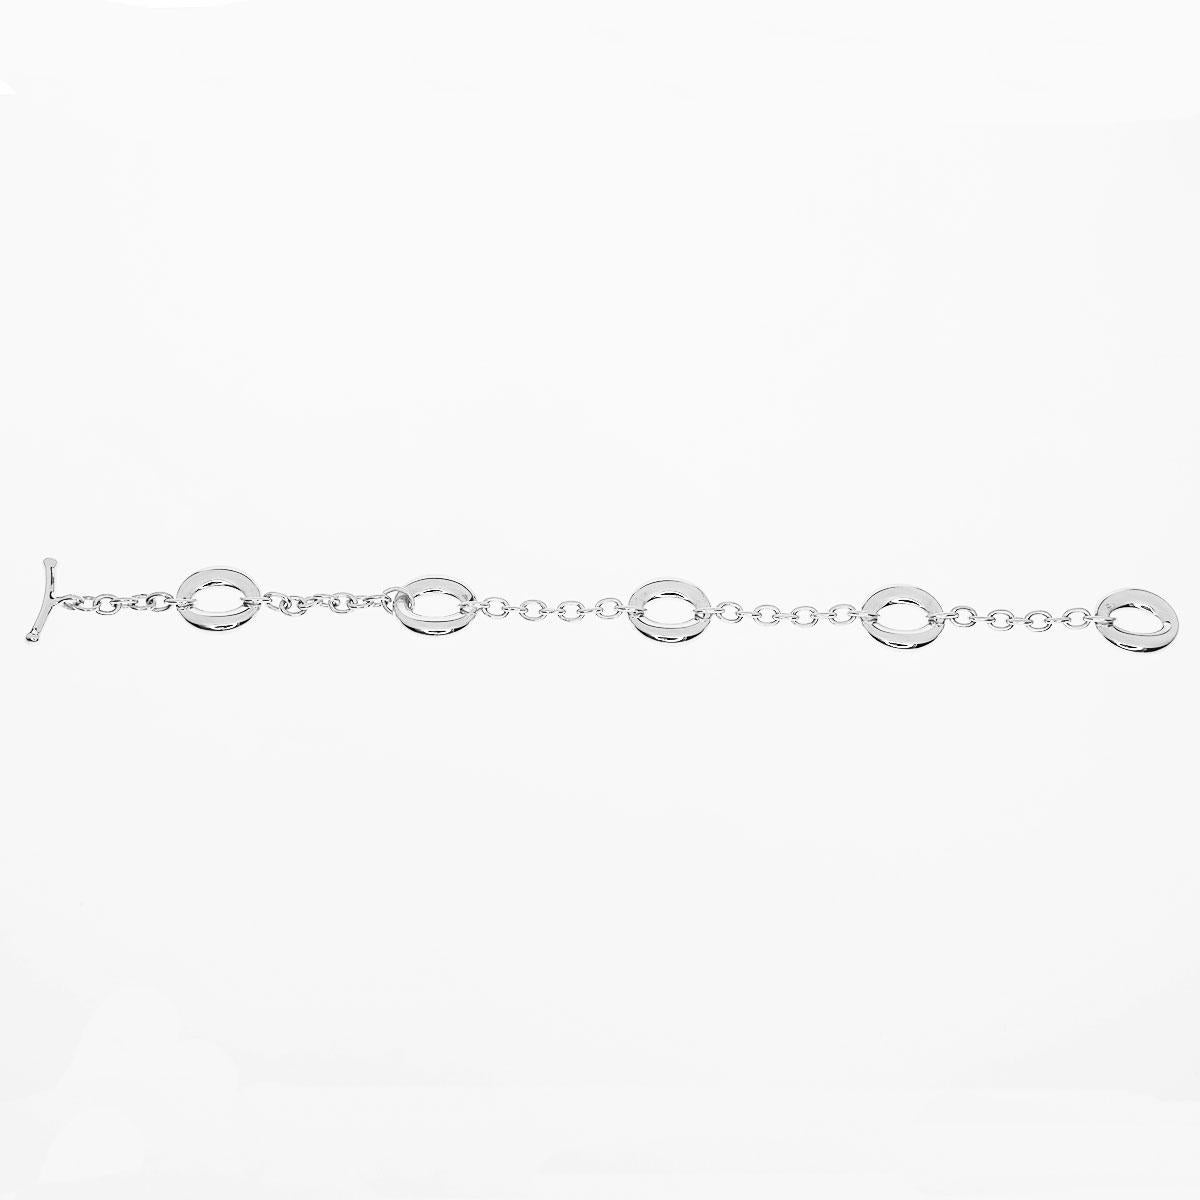 Brand:TIFFANY&Co.
Name:Seviana Elsa Peretti Bracelet
Material:925 SV Sterling Silver
Weight:17.6g（Approx)
Band length(inch):18cm / 7.08in（Approx)
Width(inch):14.14mm / 0.55in（Approx)
Comes with:Tiffany pouch